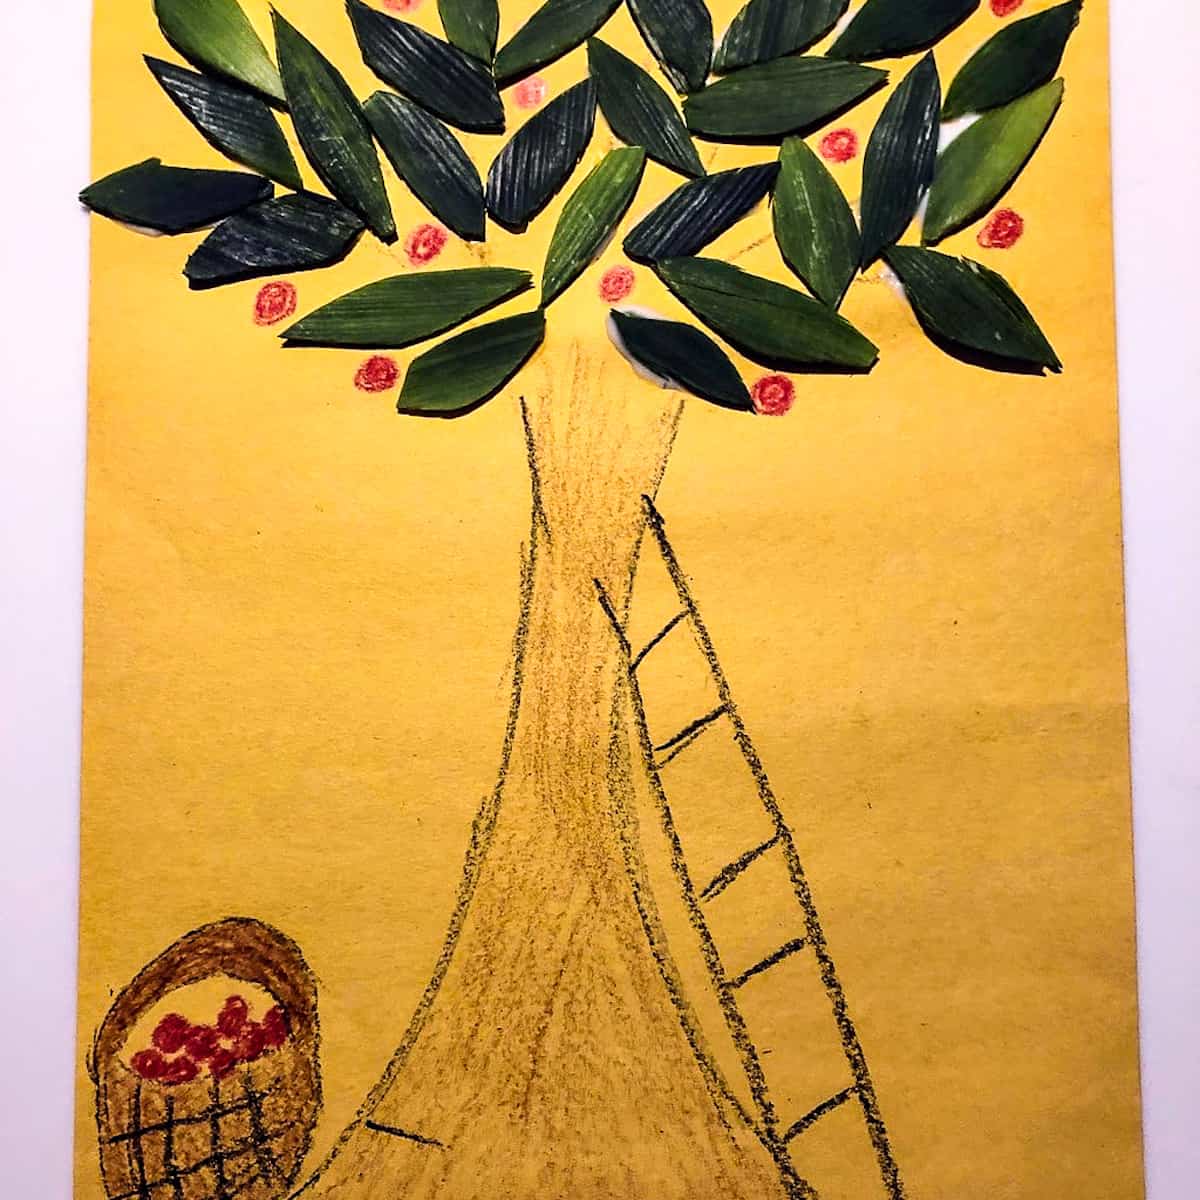 Drawing of an apple tree with a basket of apples and ladder on yellow paper, with leek food scraps as the tree leaves